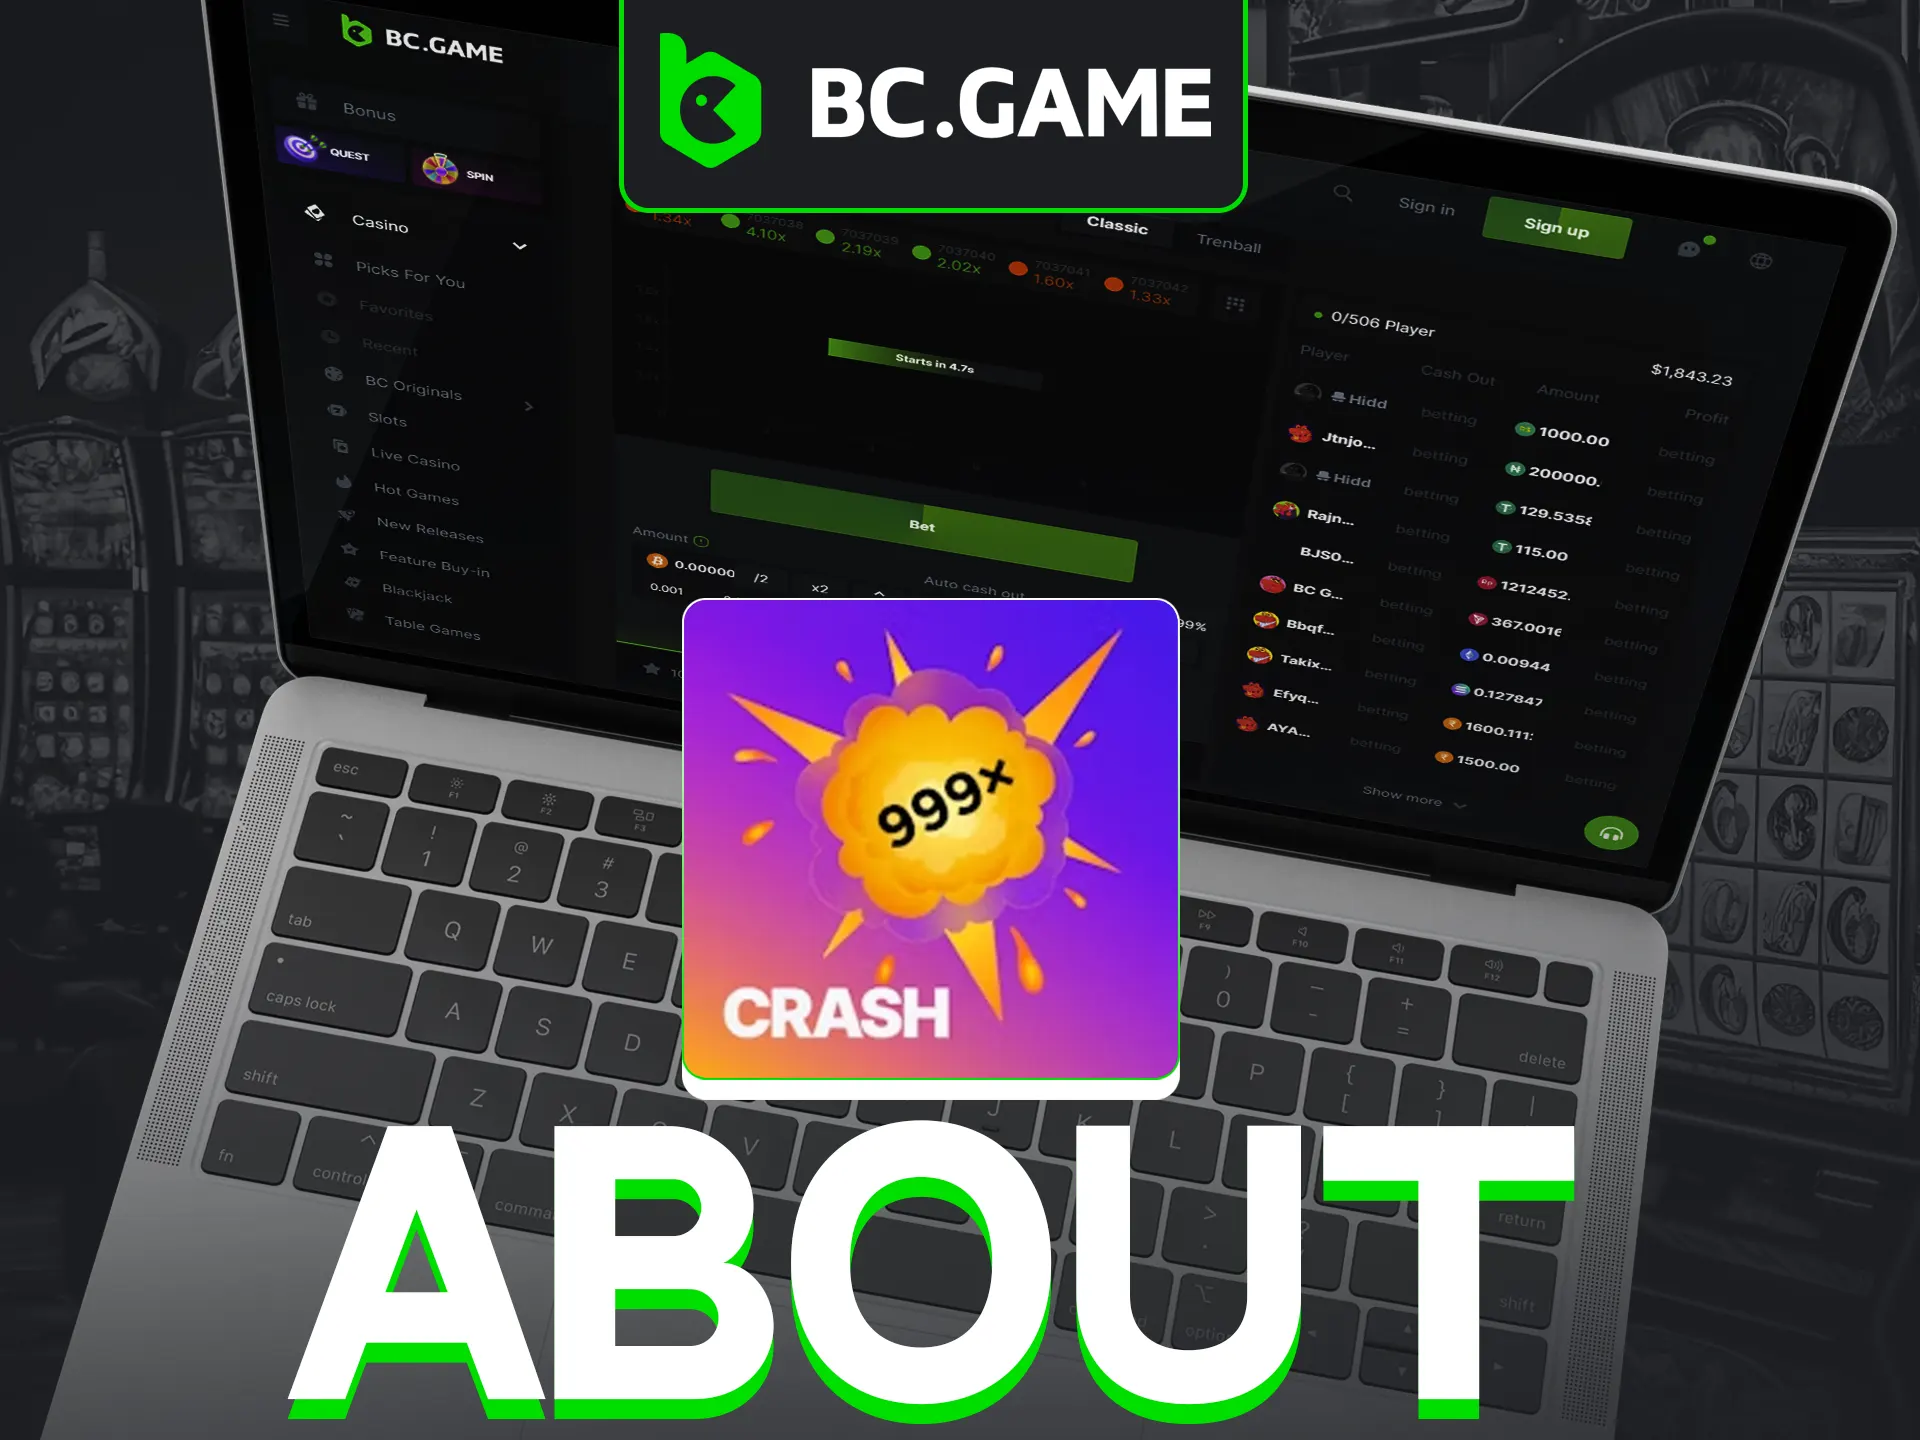 BC Game's Crash is simple and dynamic betting.